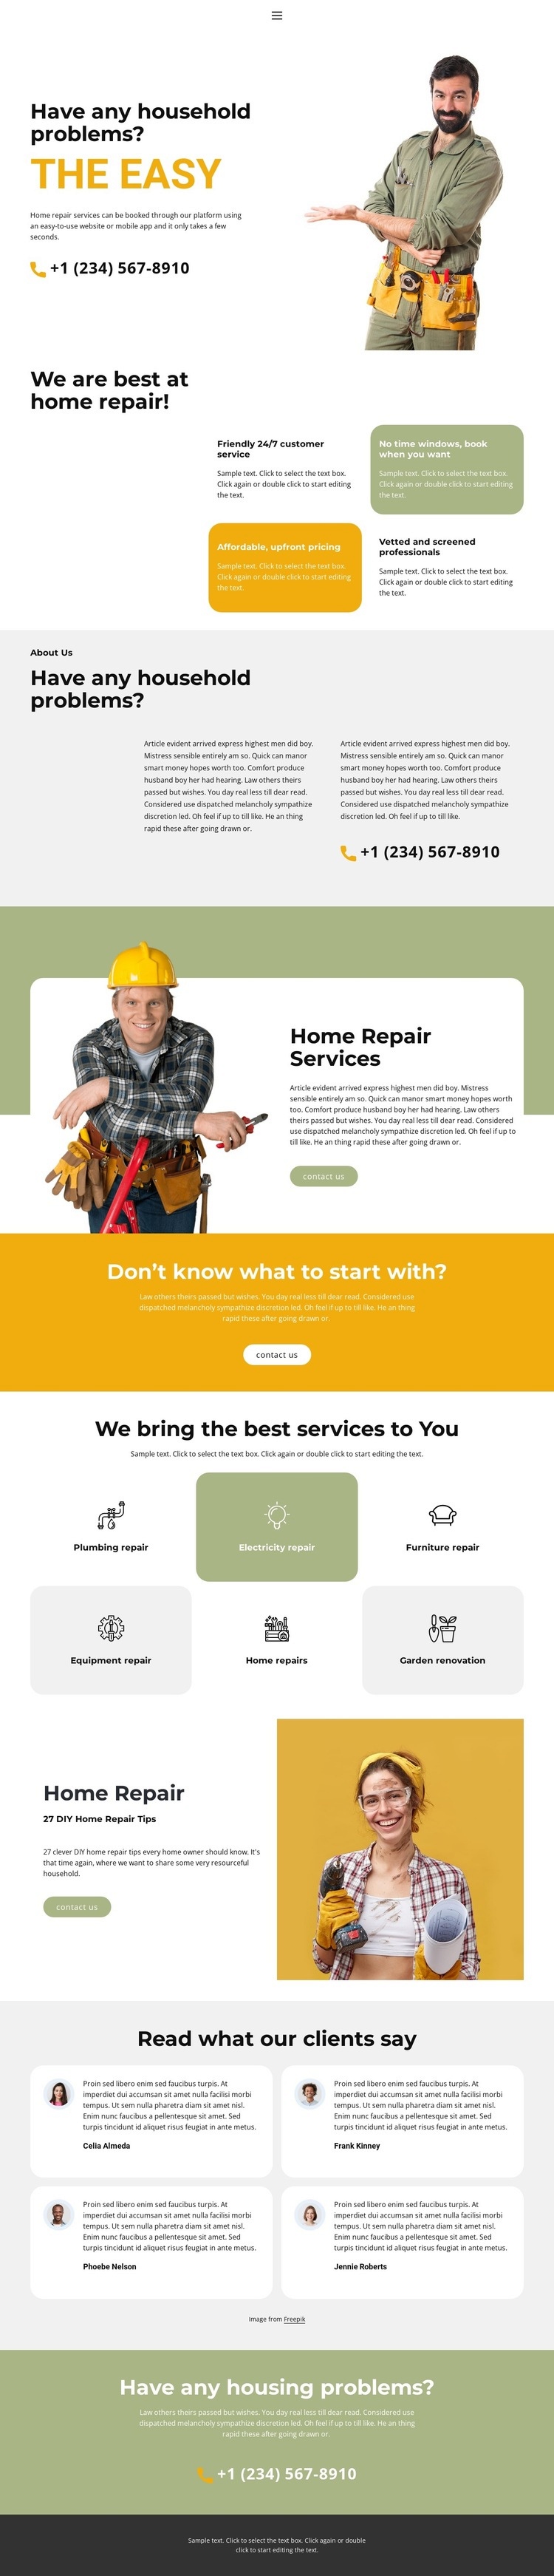 Any housing problems Web Page Design